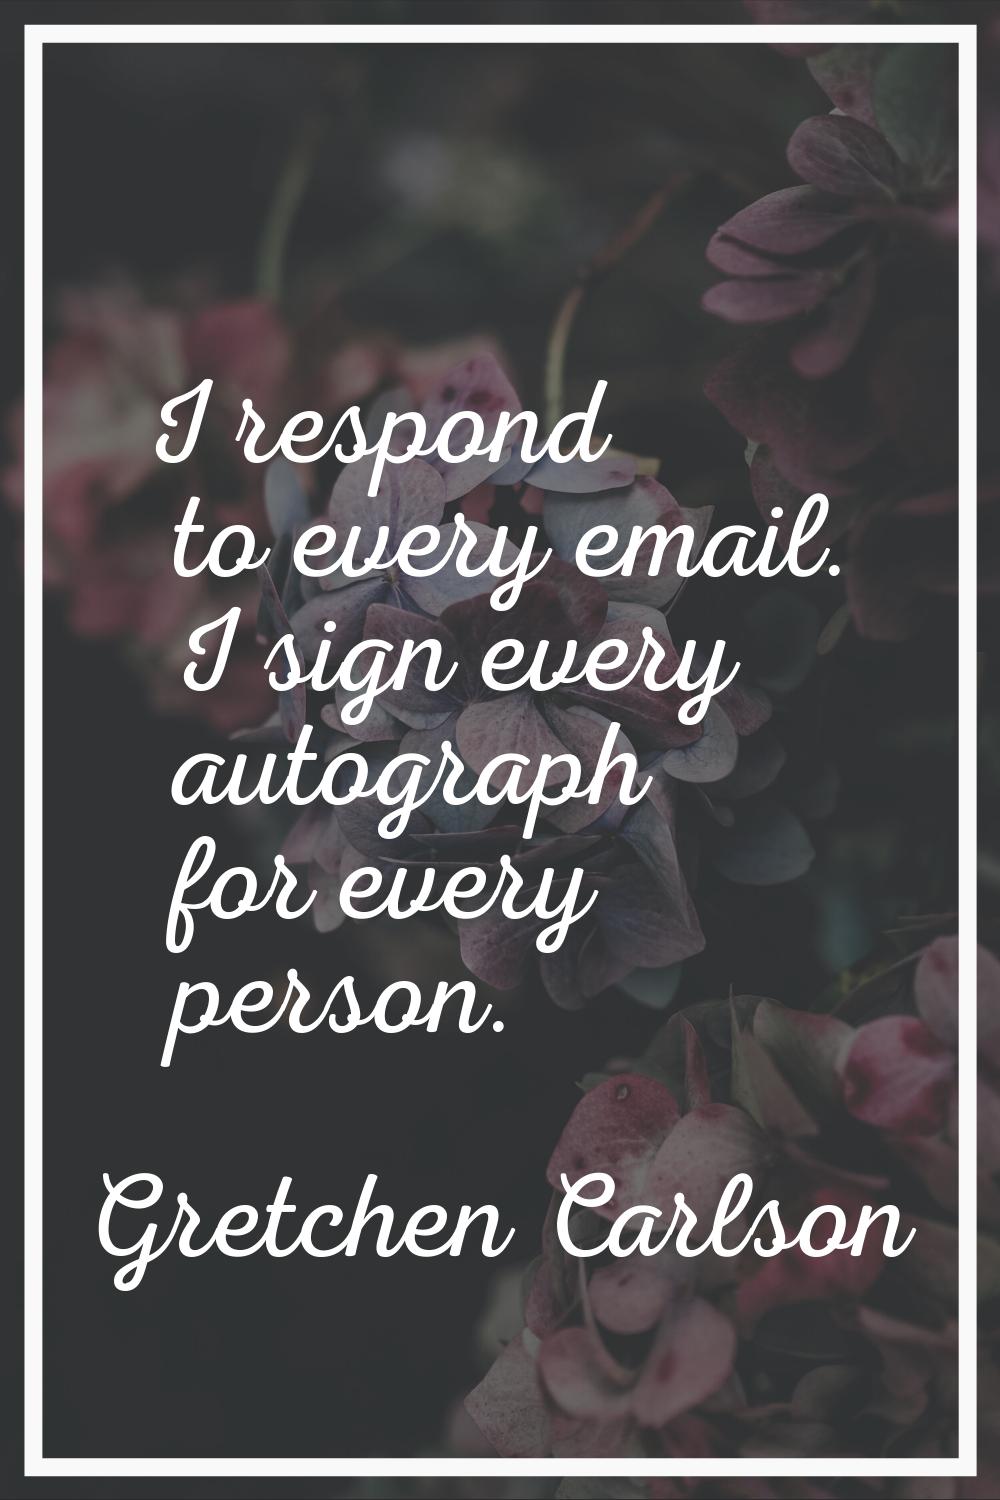 I respond to every email. I sign every autograph for every person.